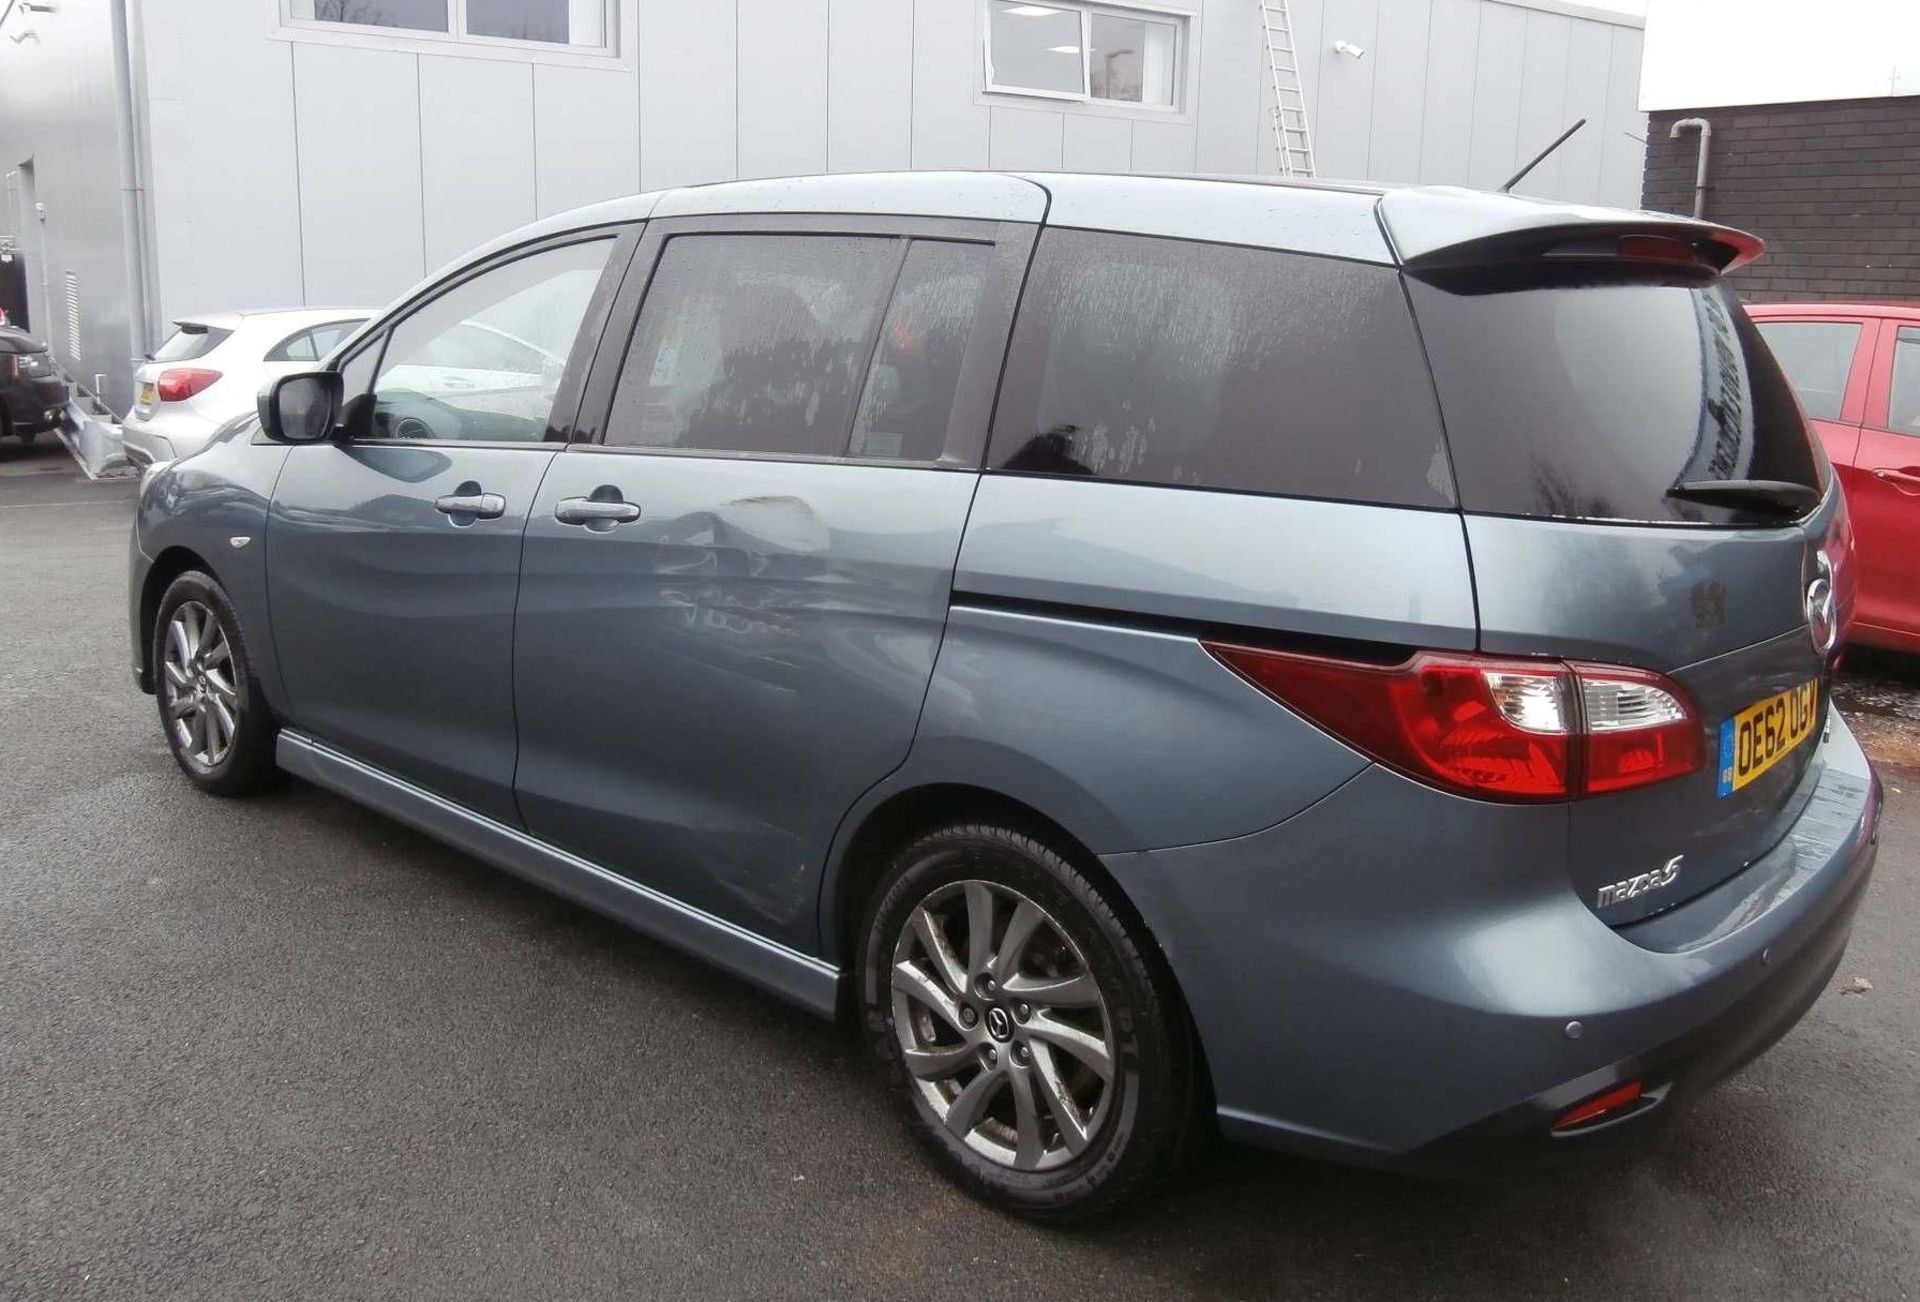 2013 Mazda 5 2.0 Venture Edition 5 Dr MPV - CL505 - NO VAT ON THE HAMMER - Location: Corby, N - Image 9 of 18